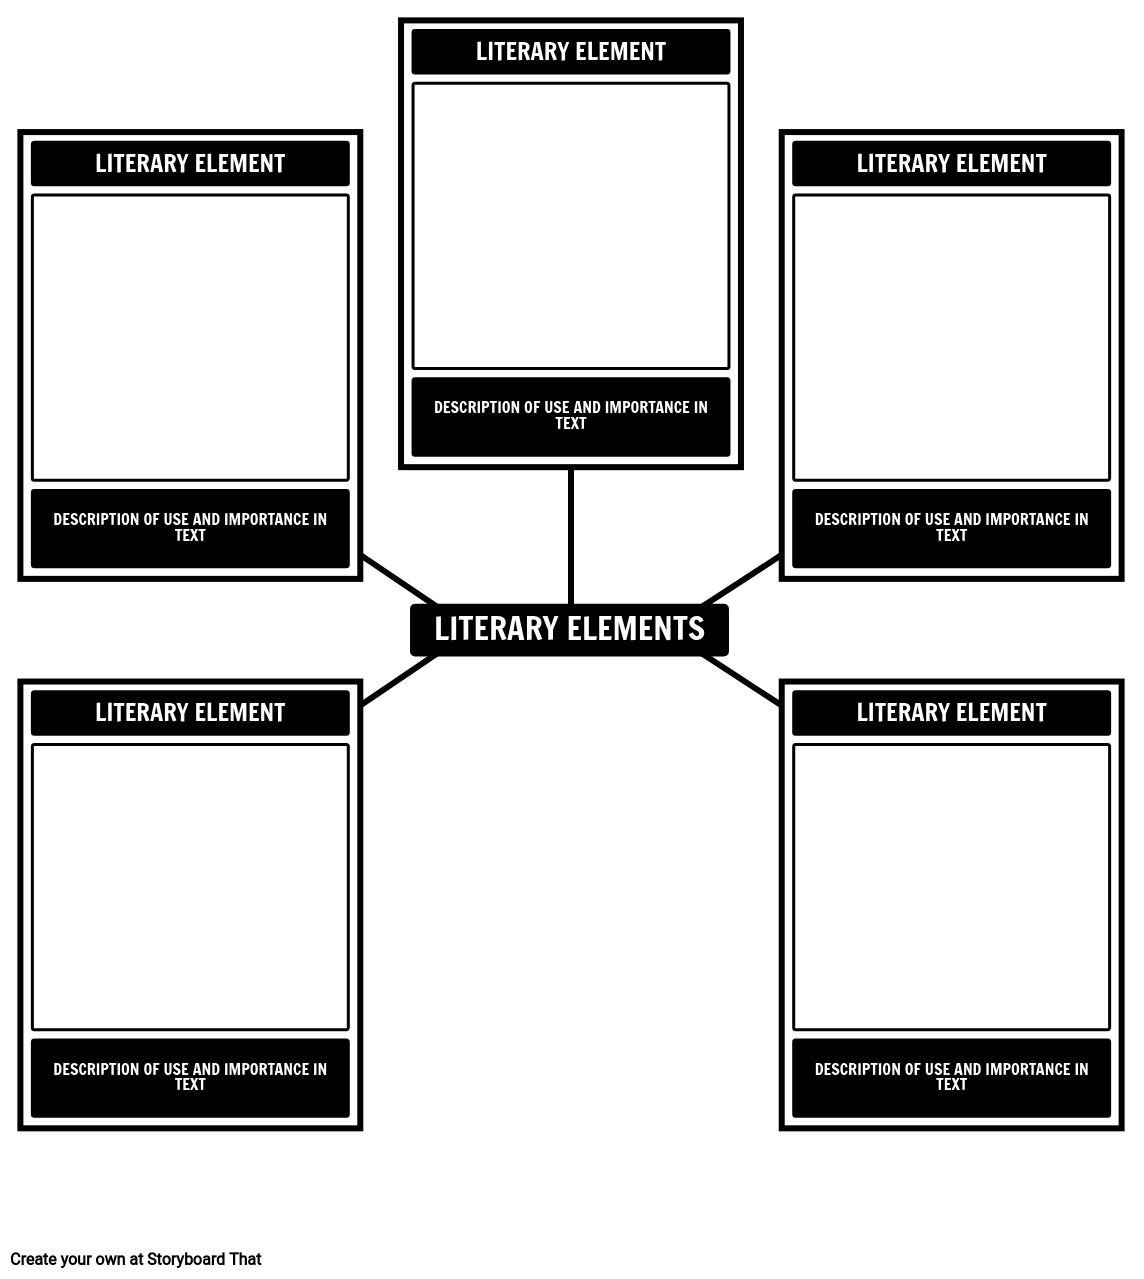 Literary Element Spider Map Template